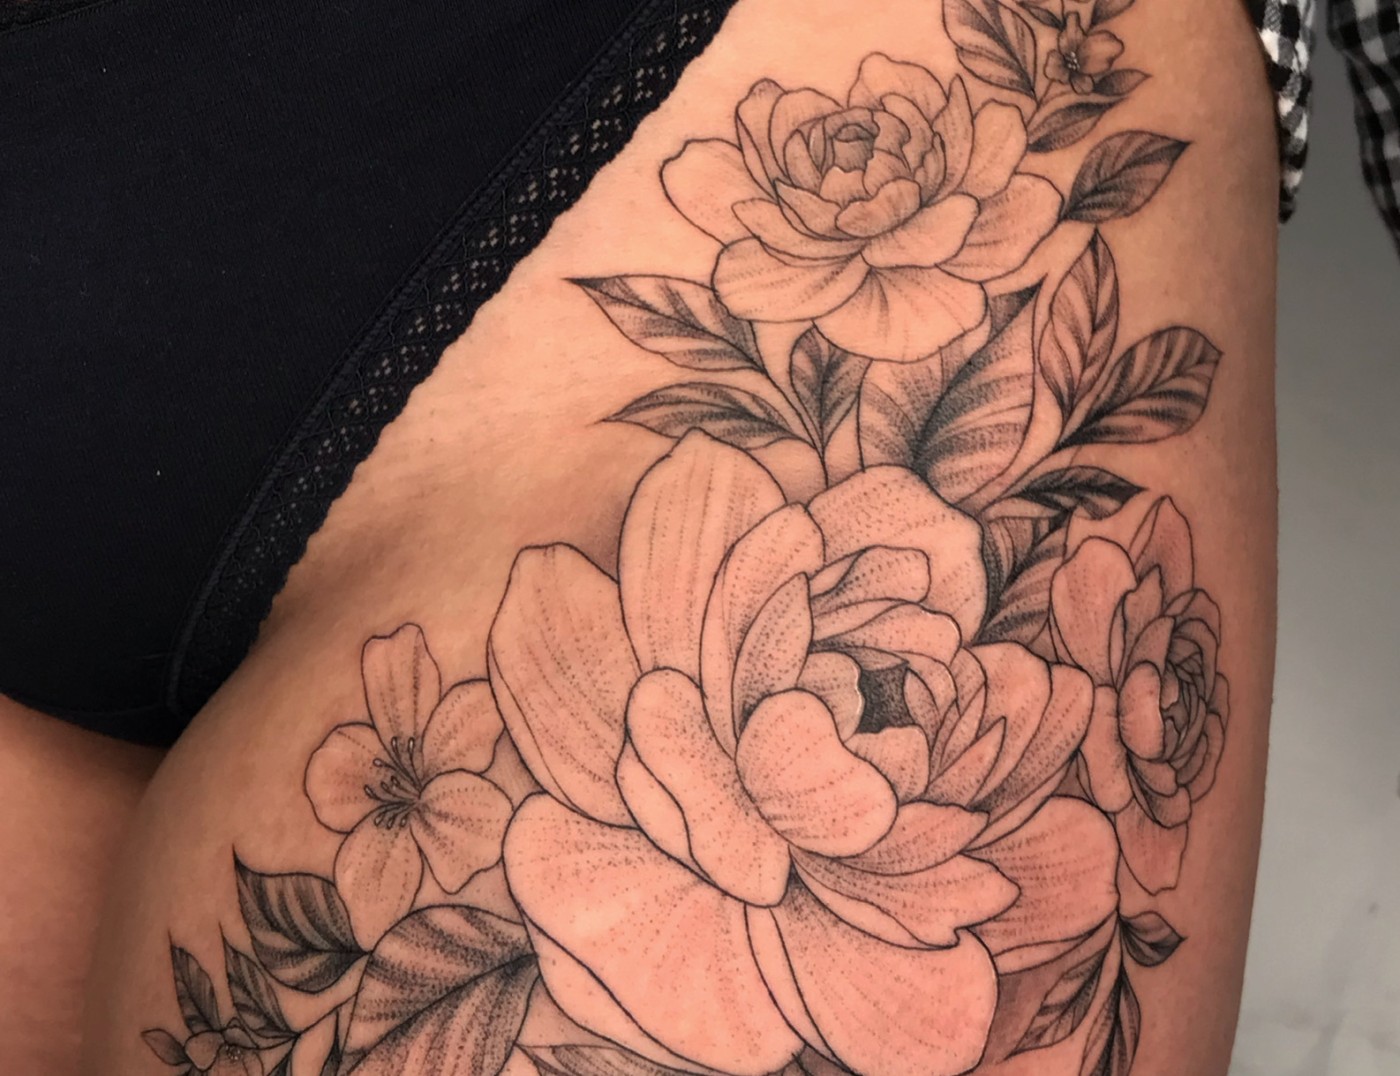 Lotus Flower Fine Line Blackwork Tattoo by Rene Cristobal, a guest artist at Iron Palm Tattoos. Lotus flowers are popular and aesthetic designs for women. Rene comes to us from Vision Tattoo Studio in Concepcion, Chile. He is available for booking Sept 11th, 2023. Call 404-973-7828 or stop by for a free consultation. Walk Ins are welcome.